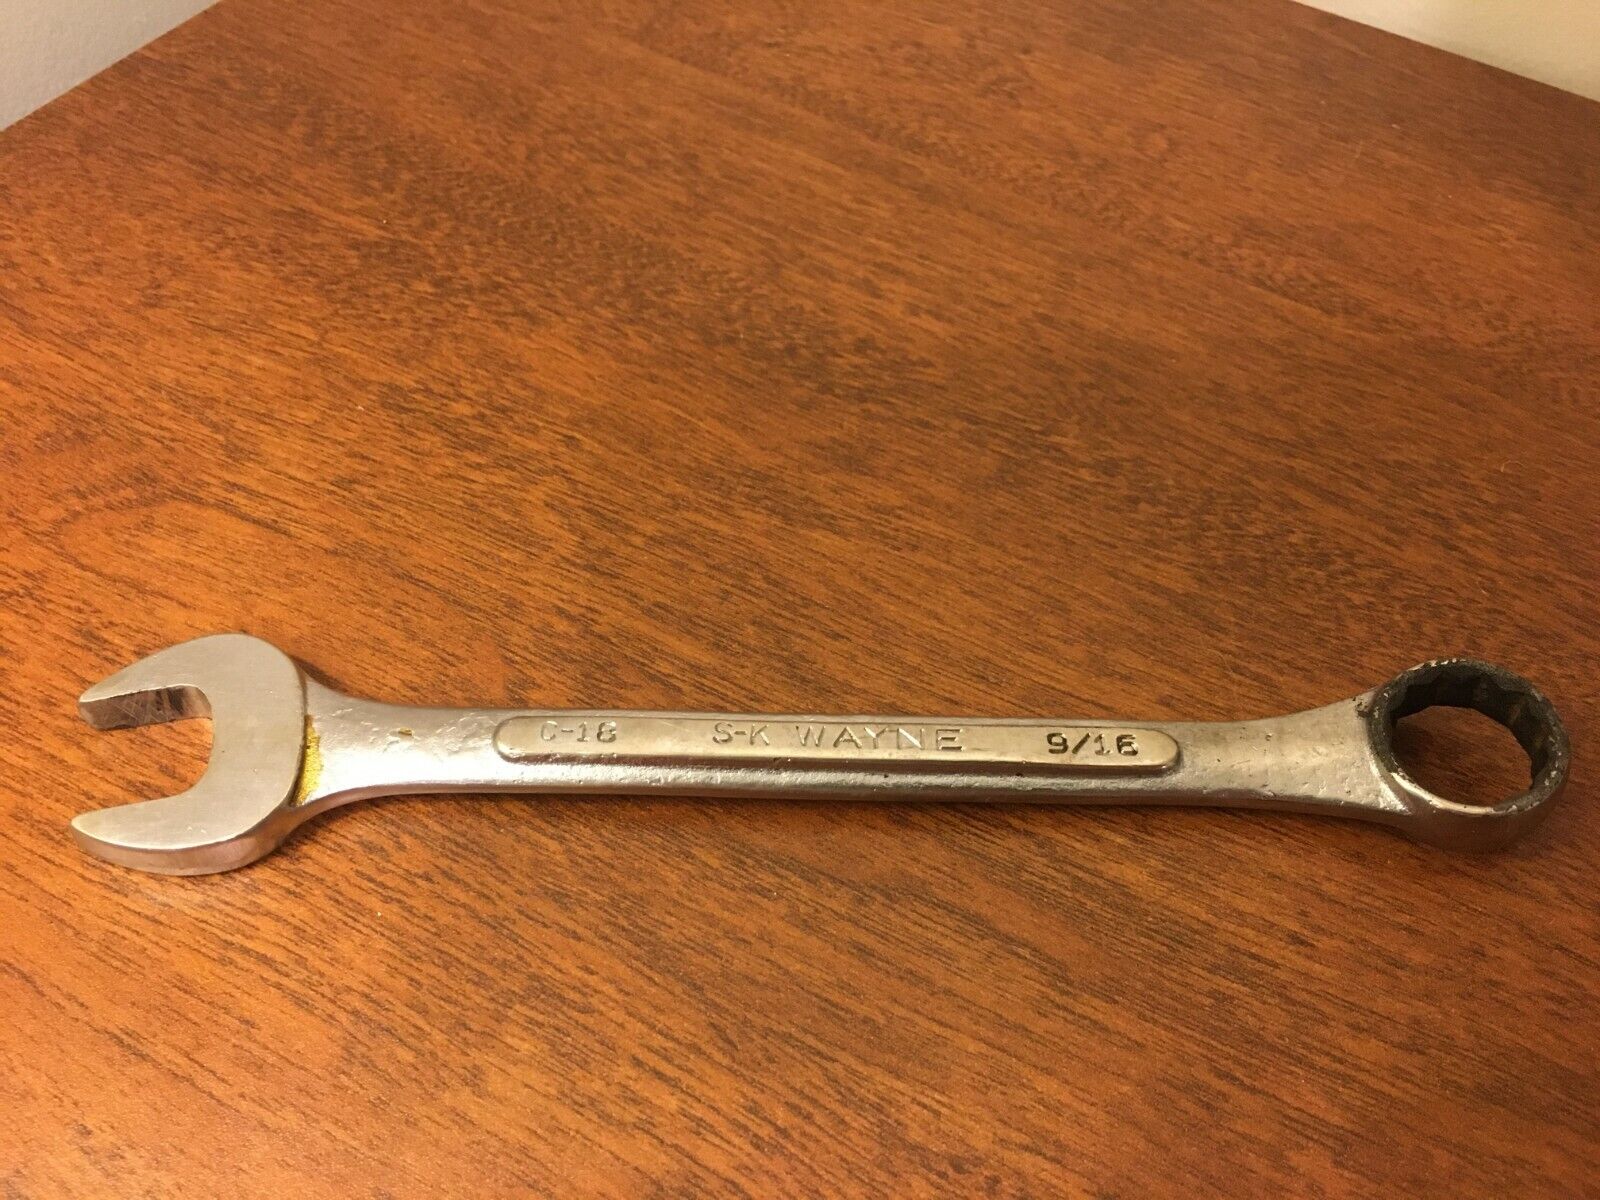 S-K WAYNE 9/16 inch Combination Wrench C-18 12 point Made in USA